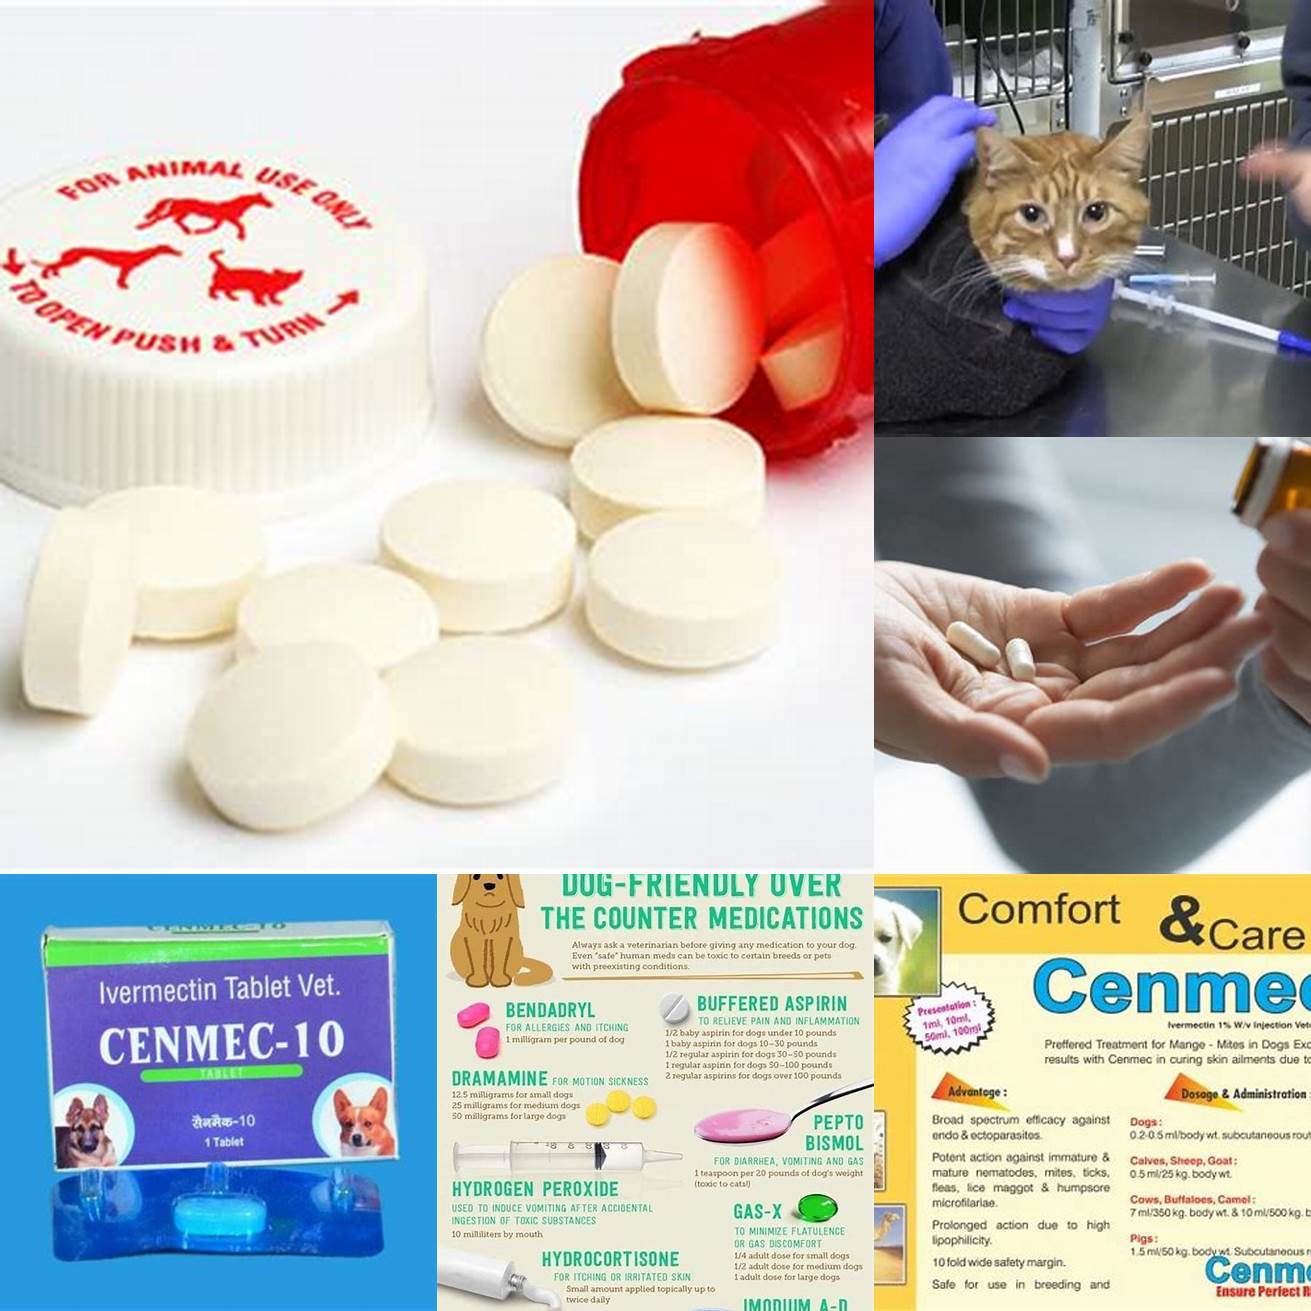 3 Administering any prescribed medications or treatments as directed by your vet